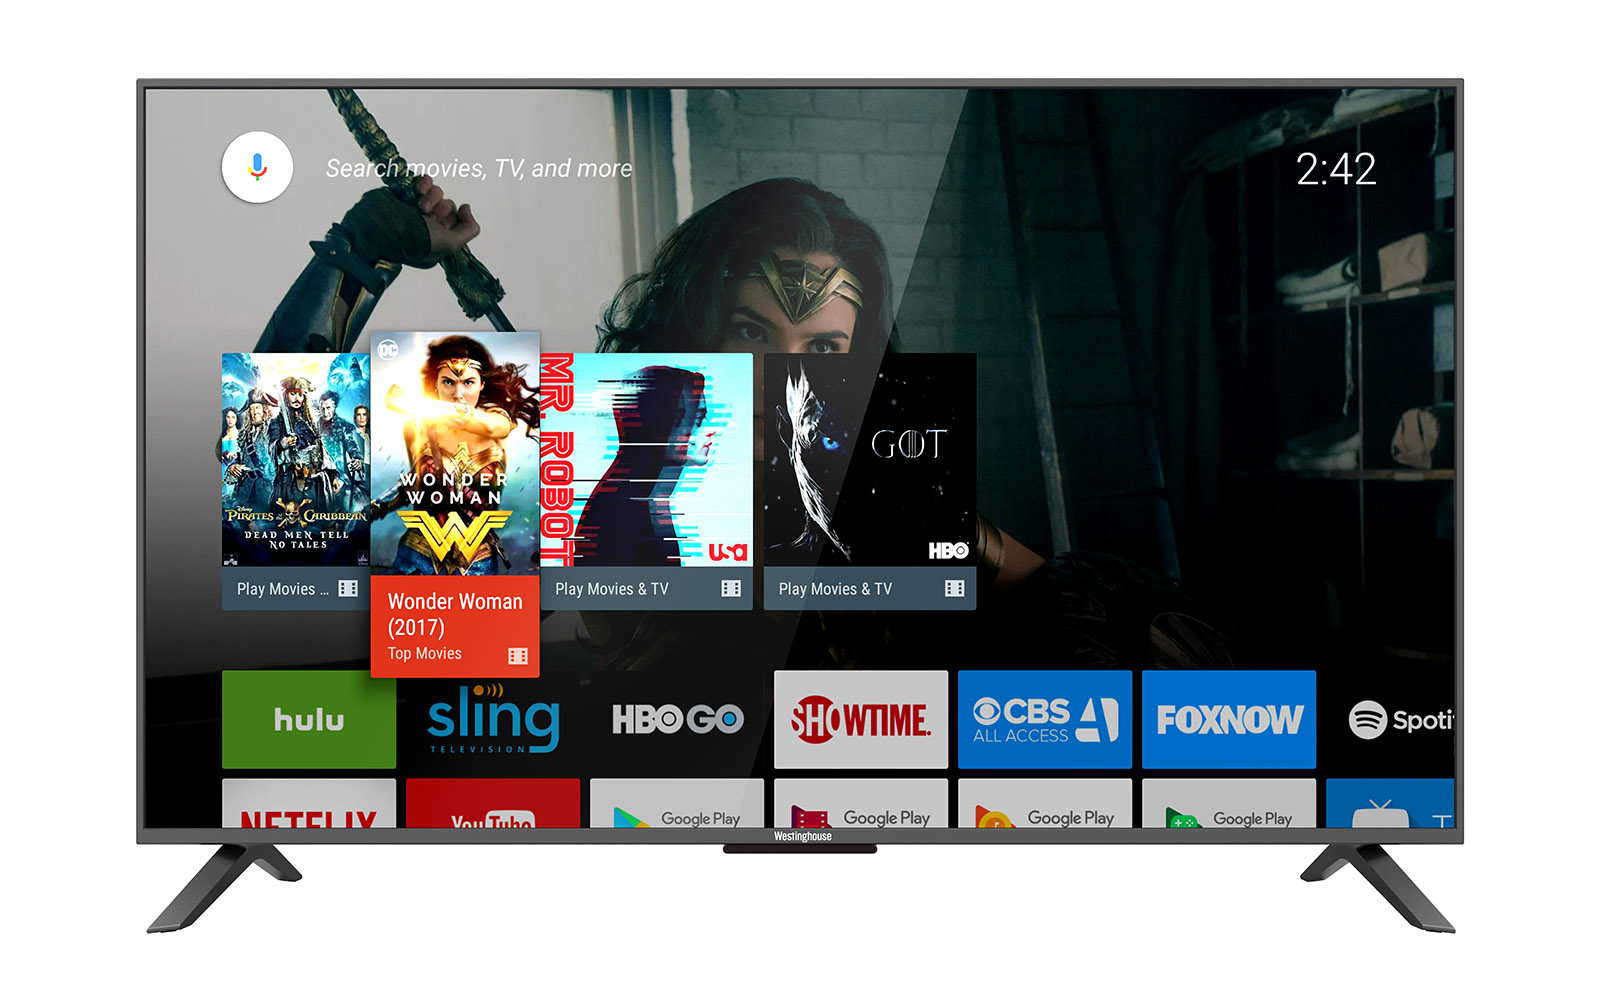 Android TV games. Old Android TV Sony. Play movies.